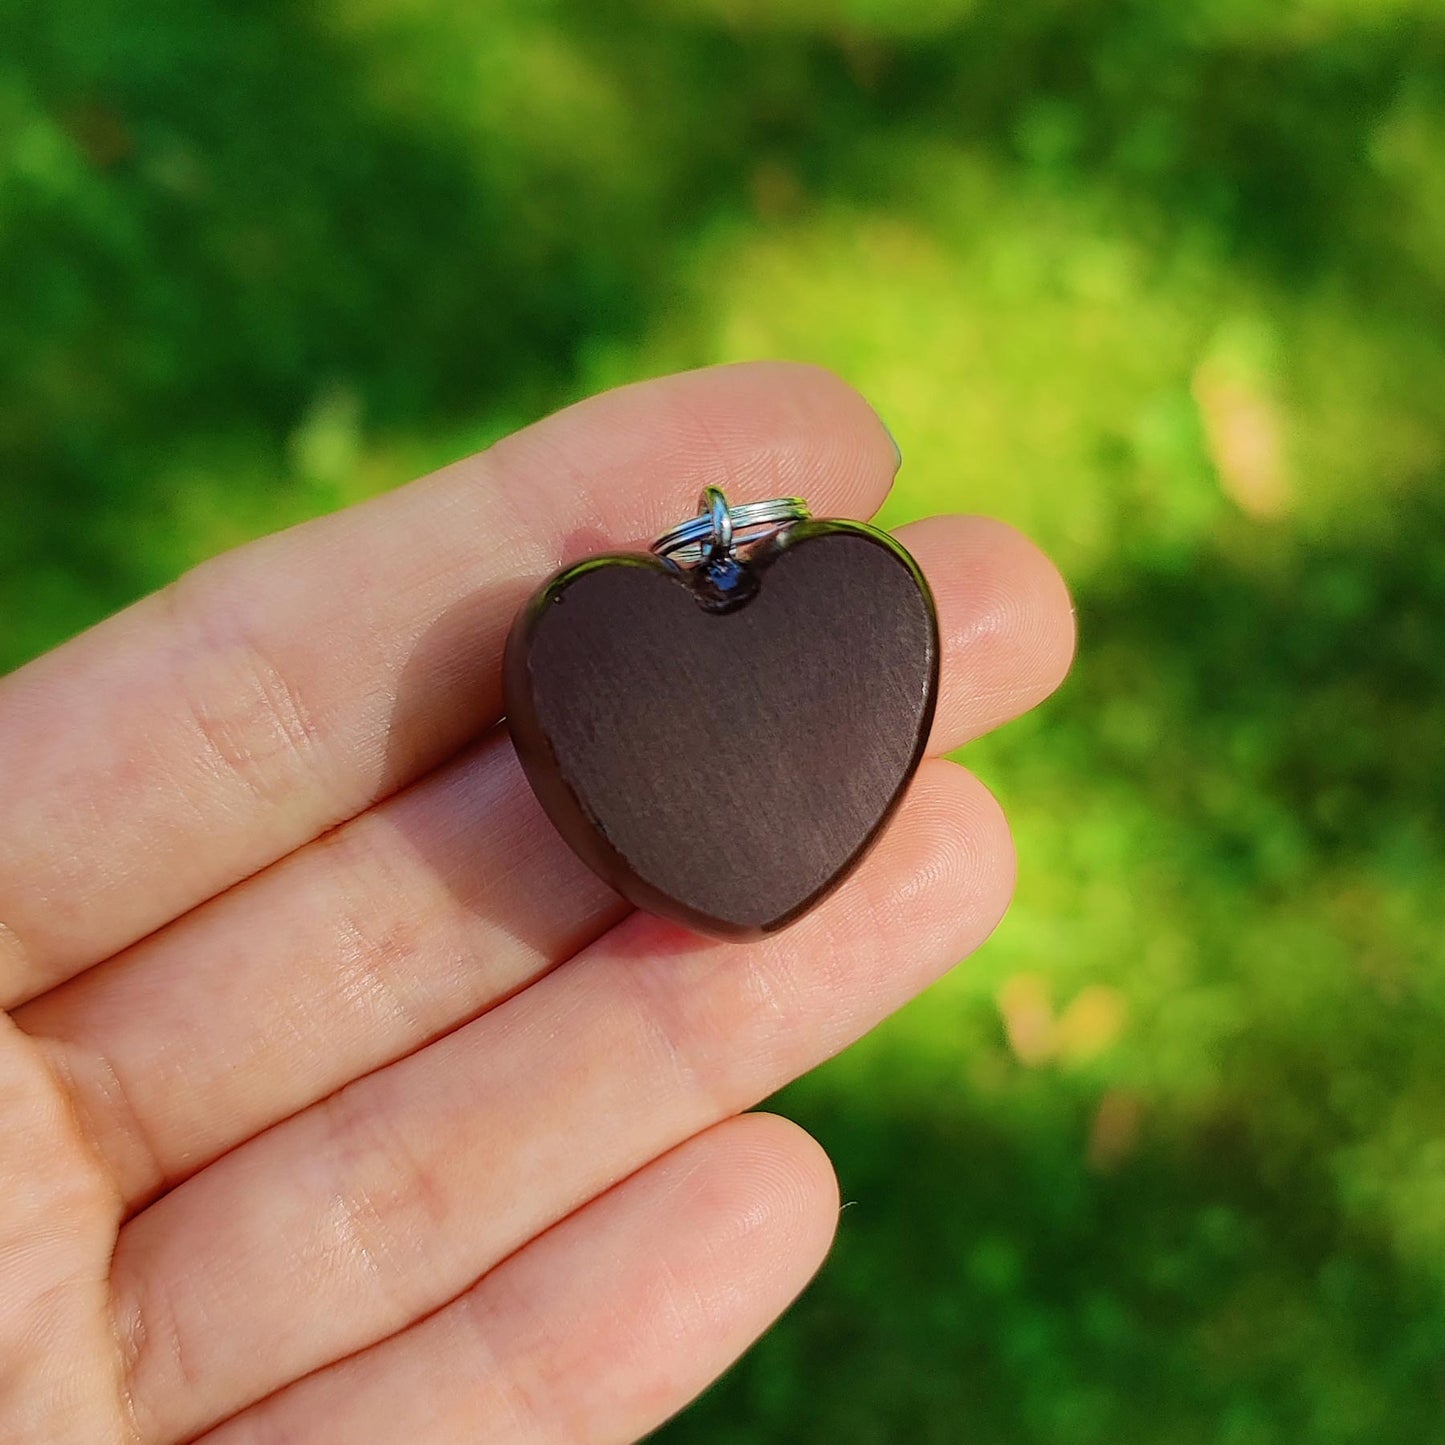 Kids or Pets Heart Shape Orgonite Necklace with Celestial Symbols For Sacral Chakra